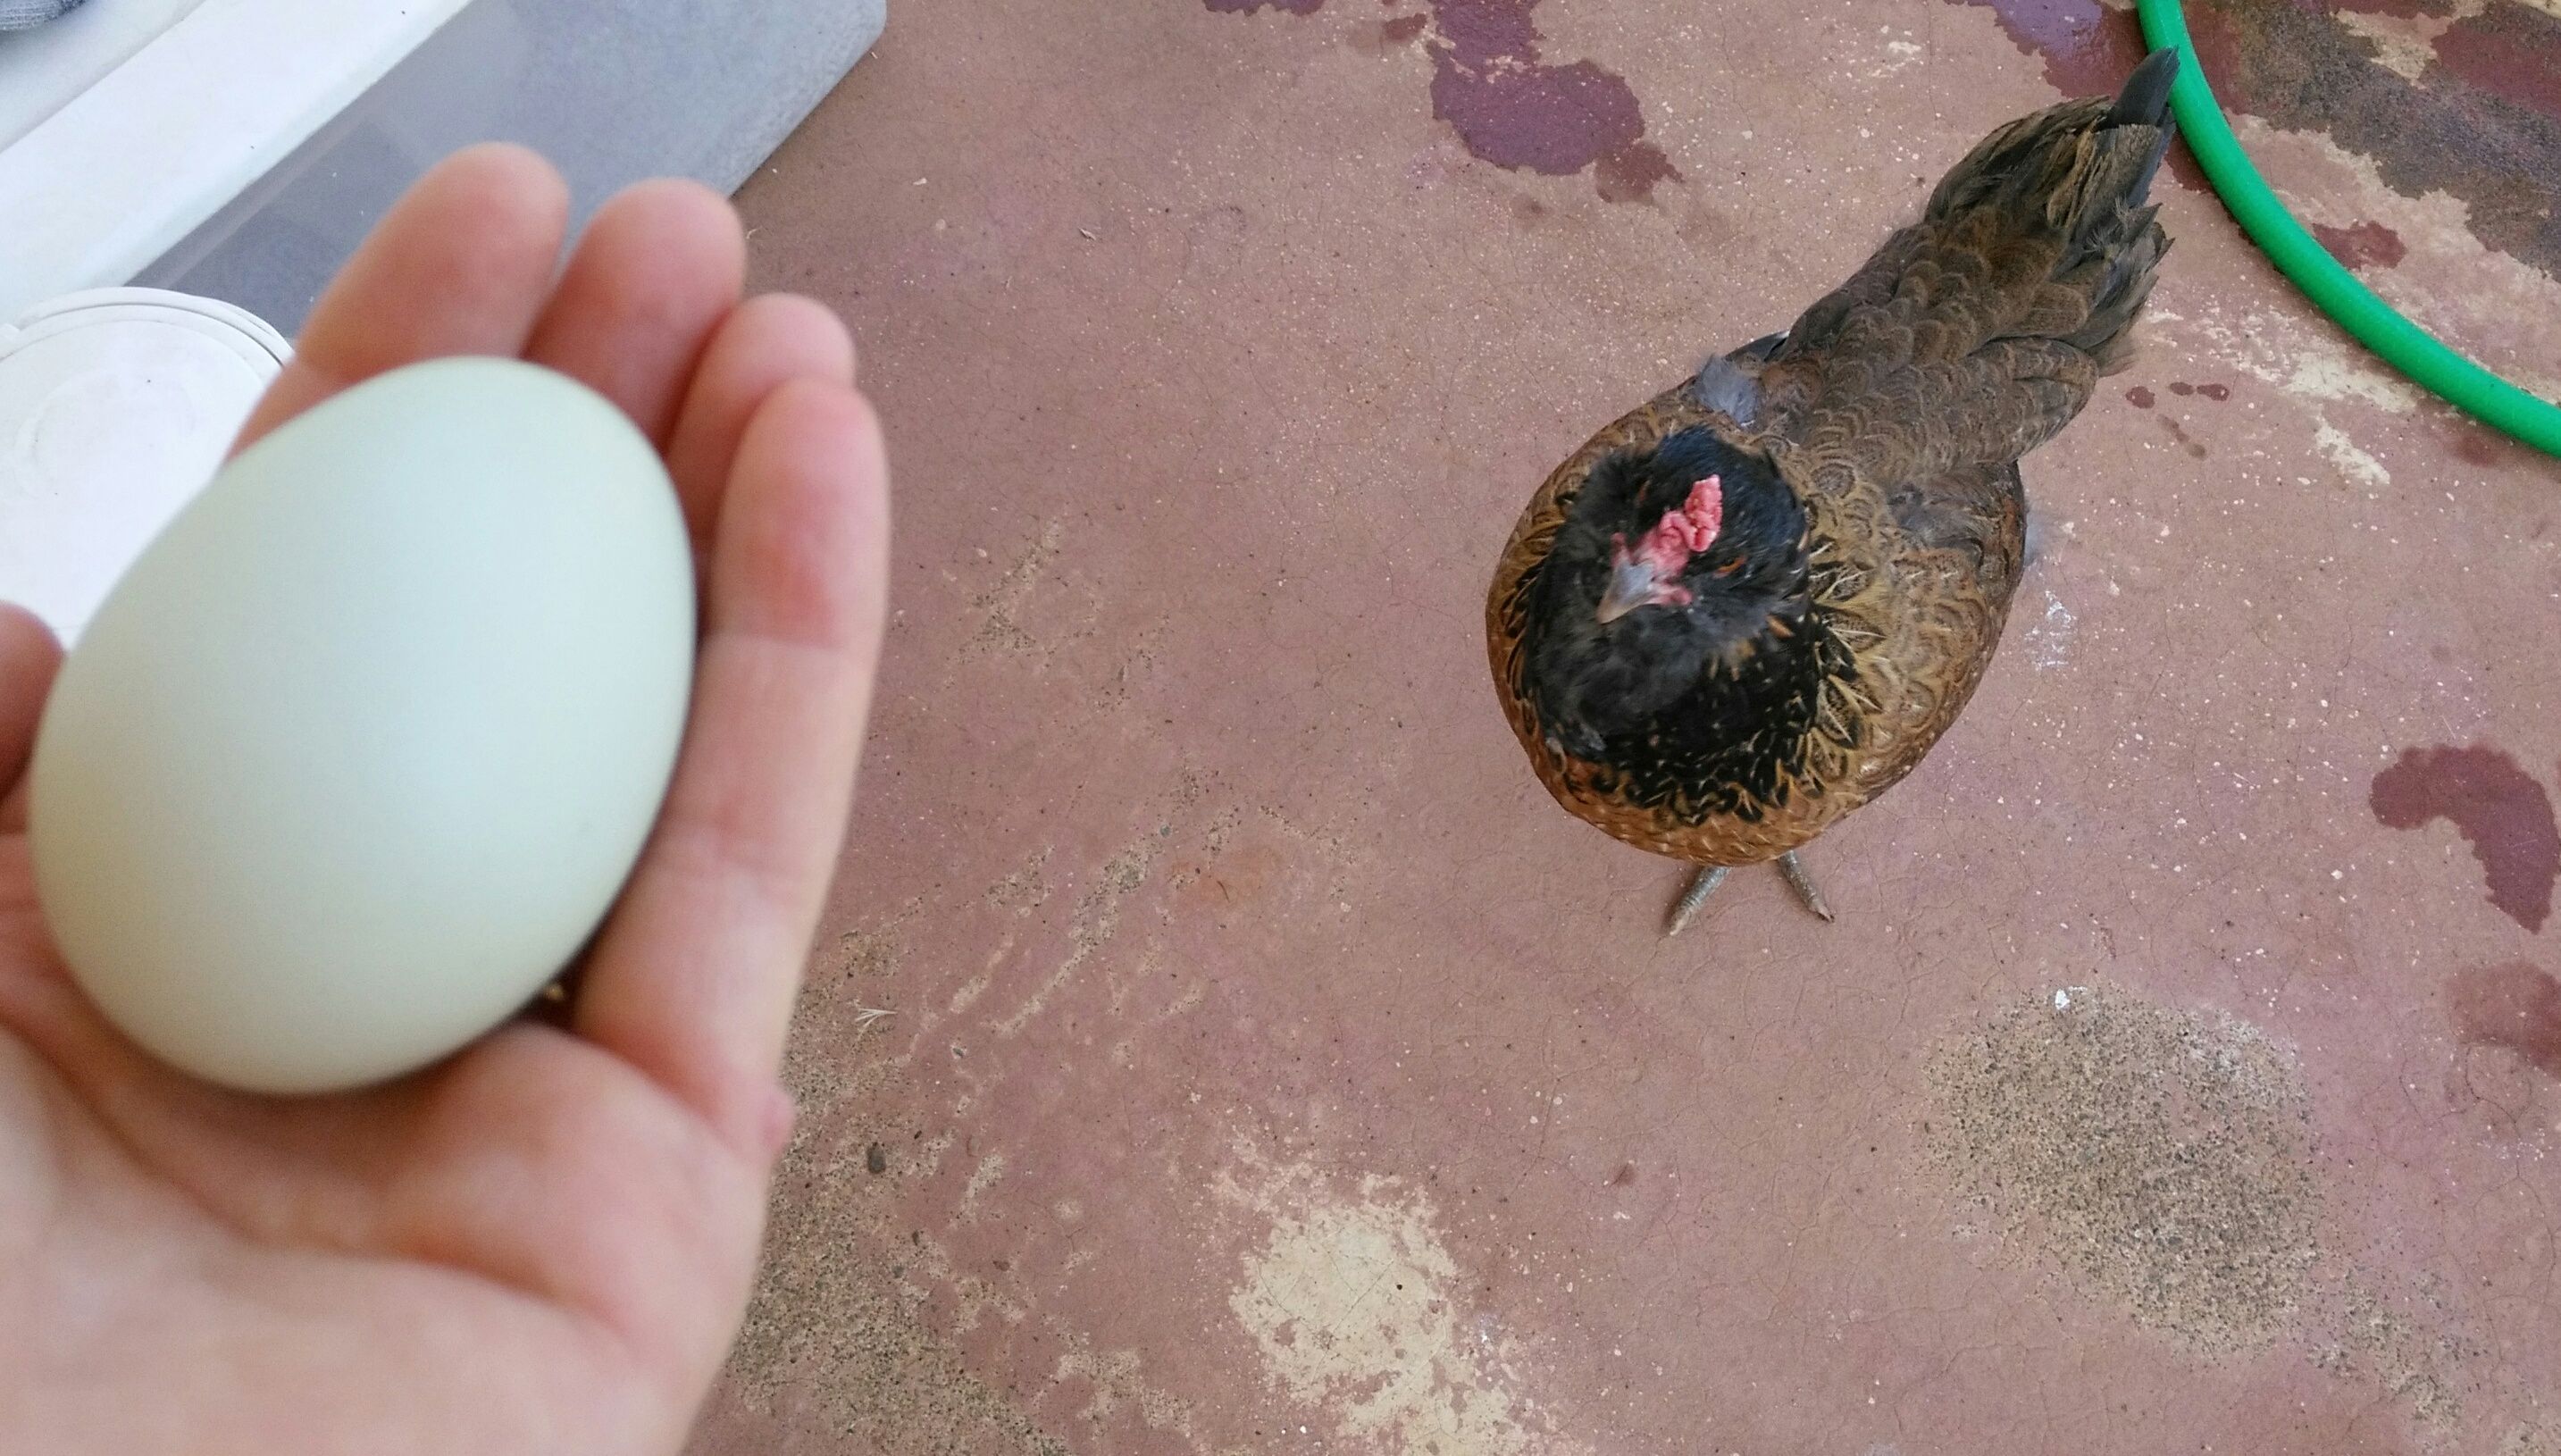 Sylvie's first egg after injury, one month and six days into recovery. Lookin' good!